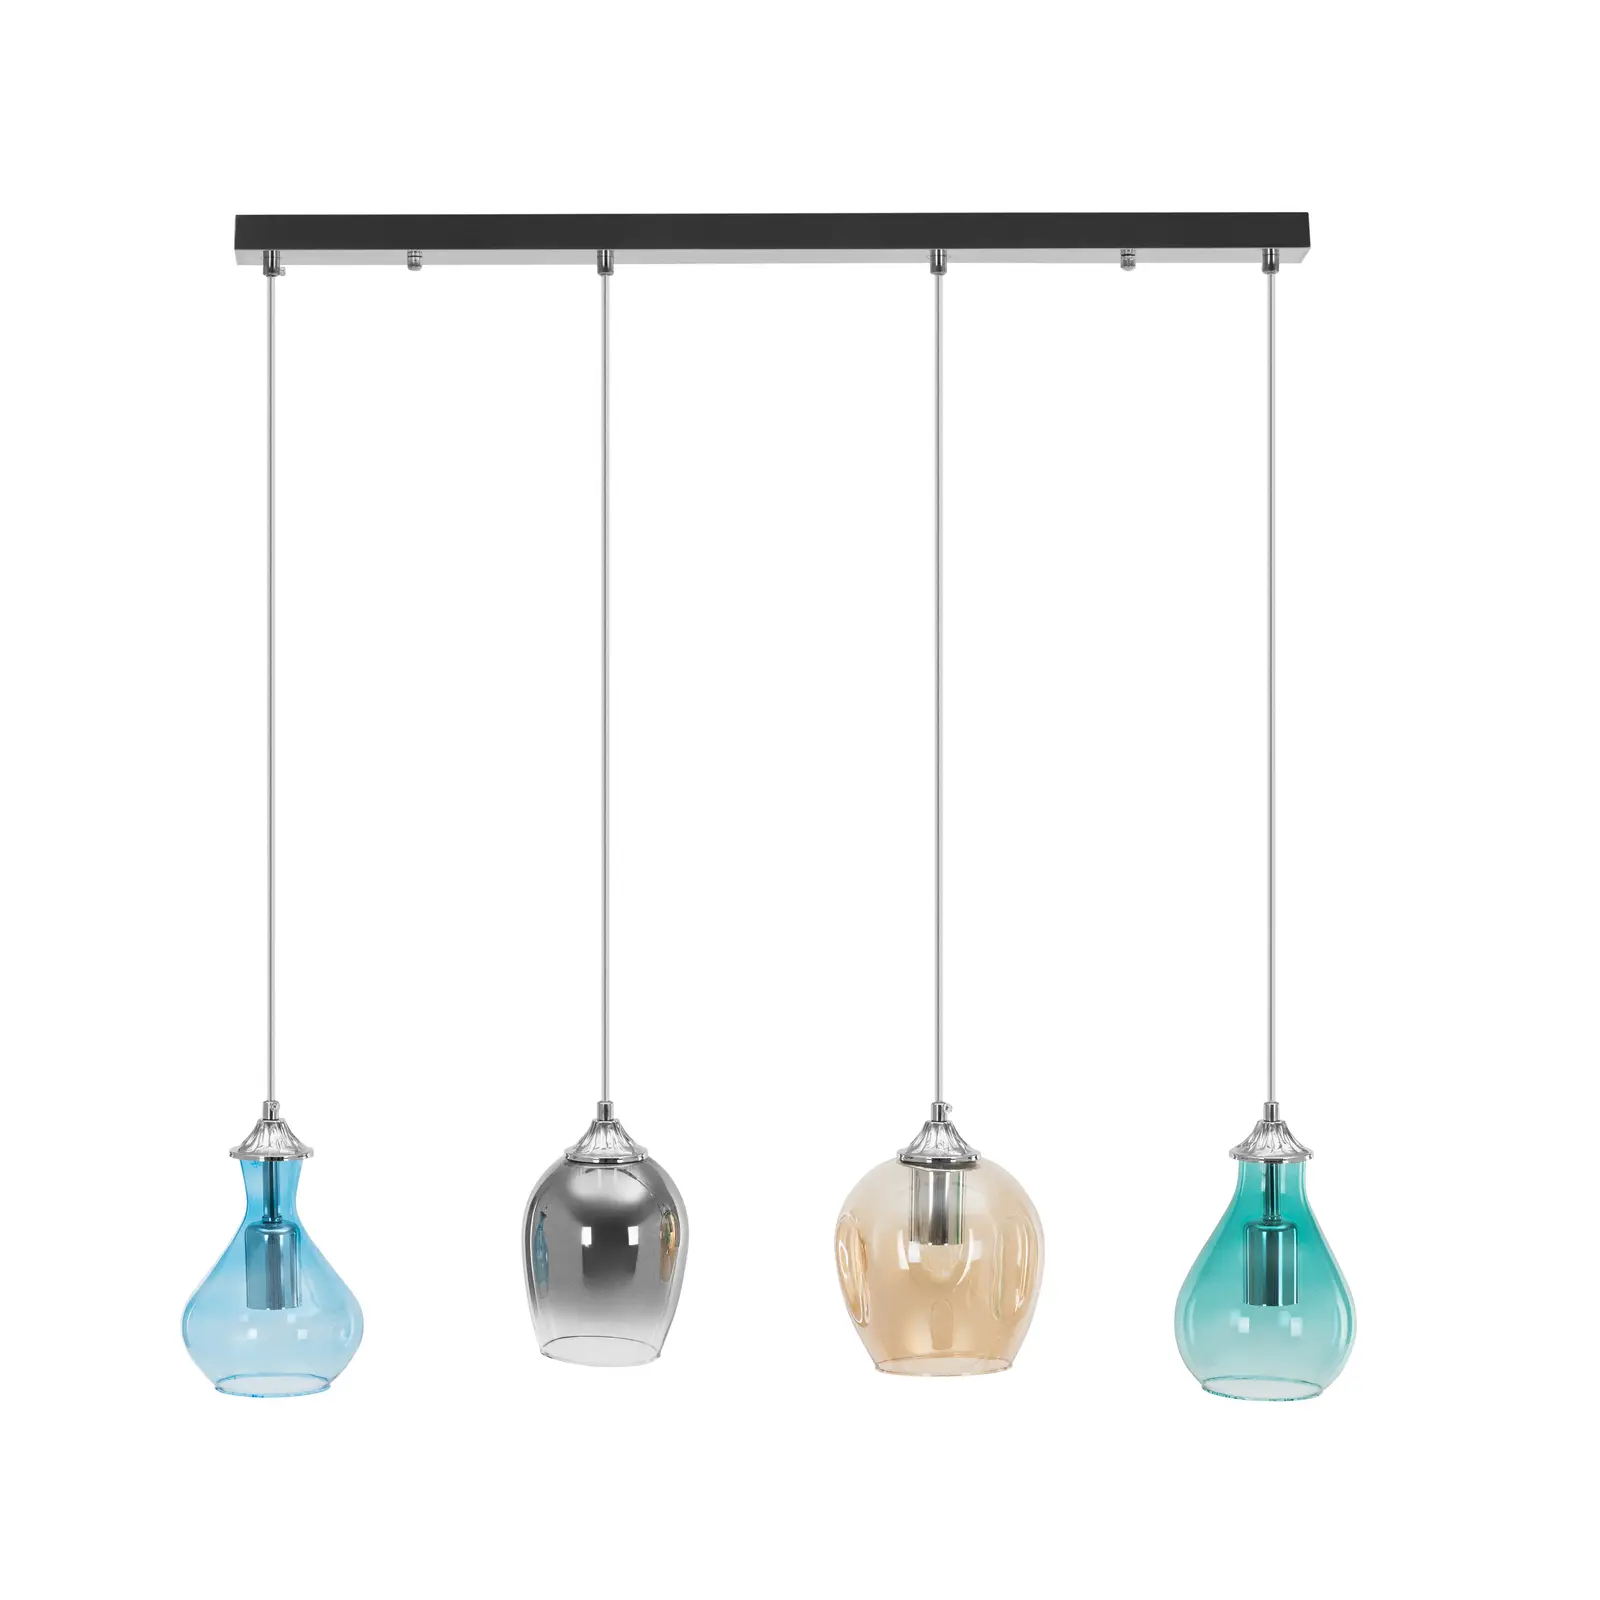 Pendant Light - 4 light sources - glass shades in various shapes